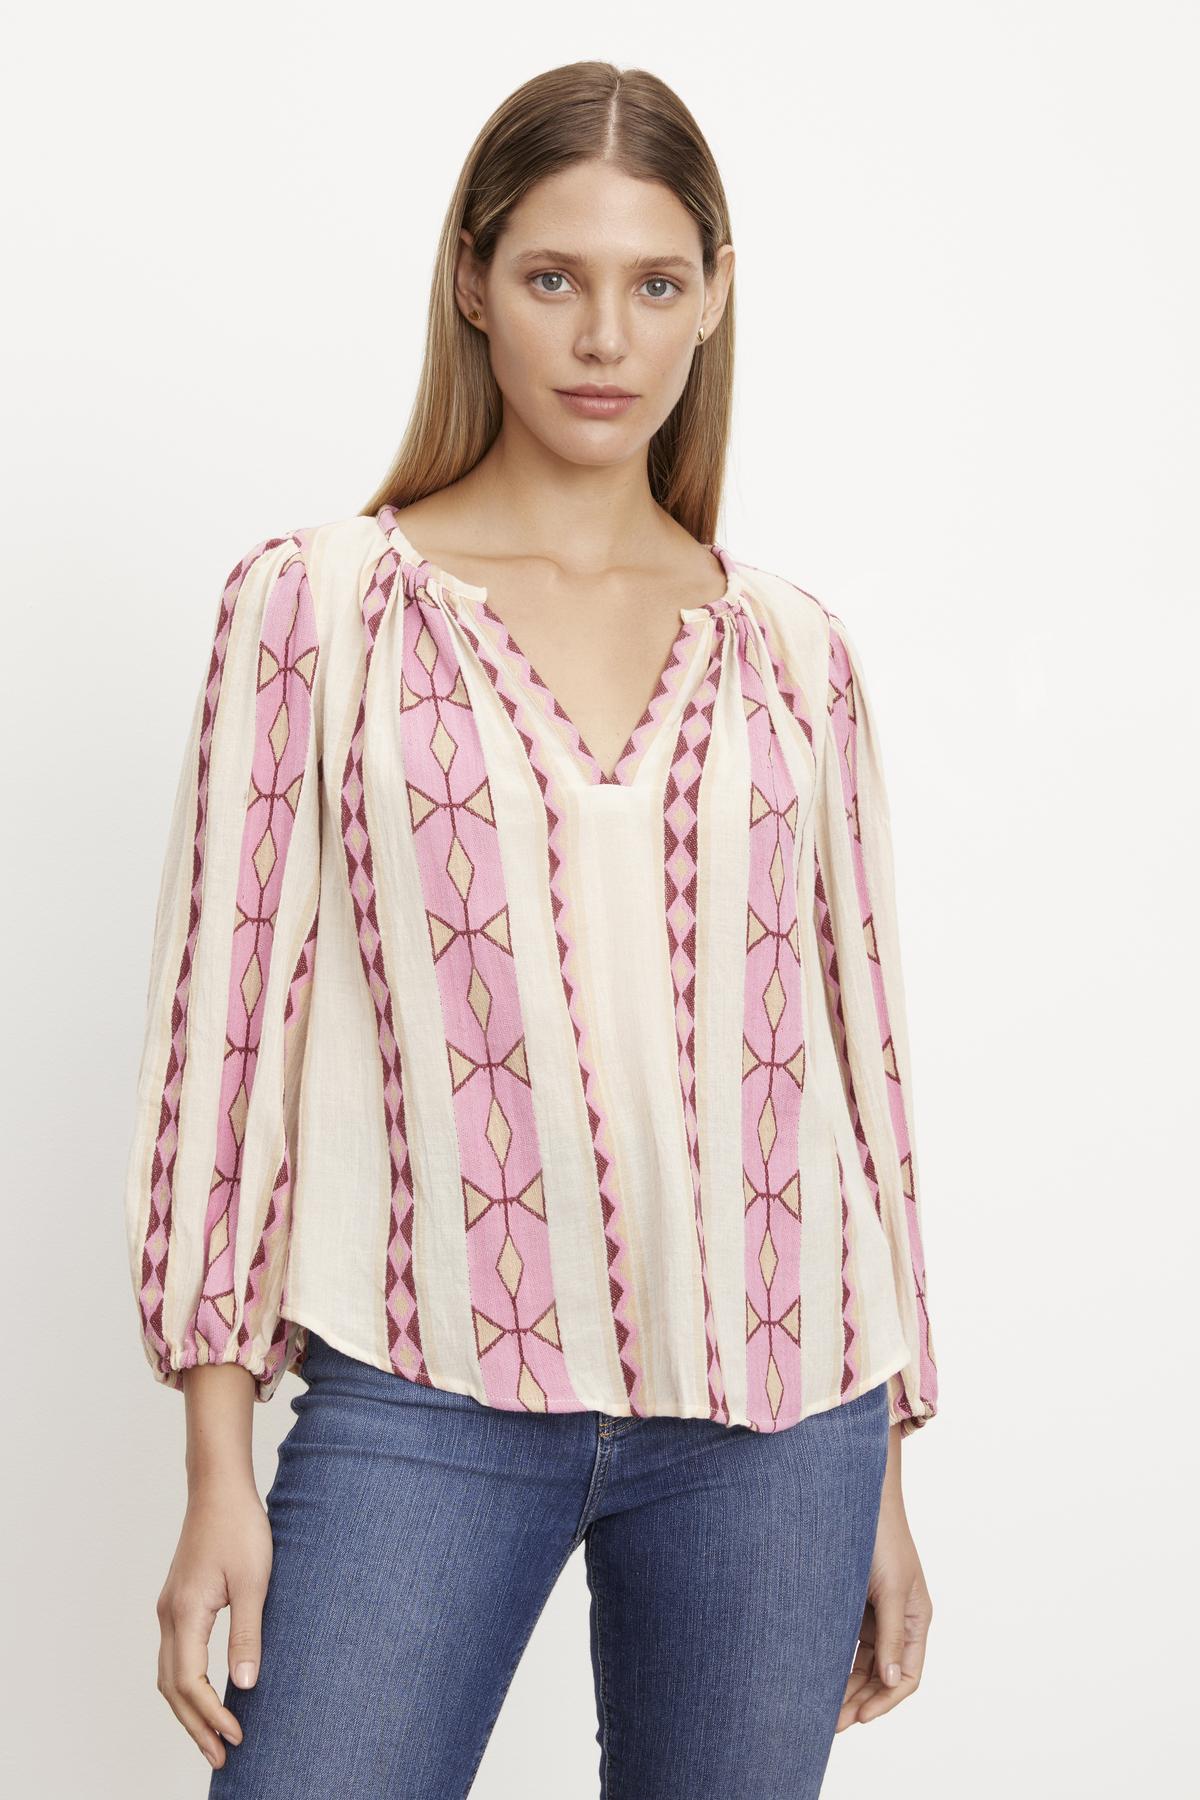 The model is wearing a pink Velvet by Graham & Spencer NANNI JACQUARD V-NECK BLOUSE with elastic cuffs.-36220815737025